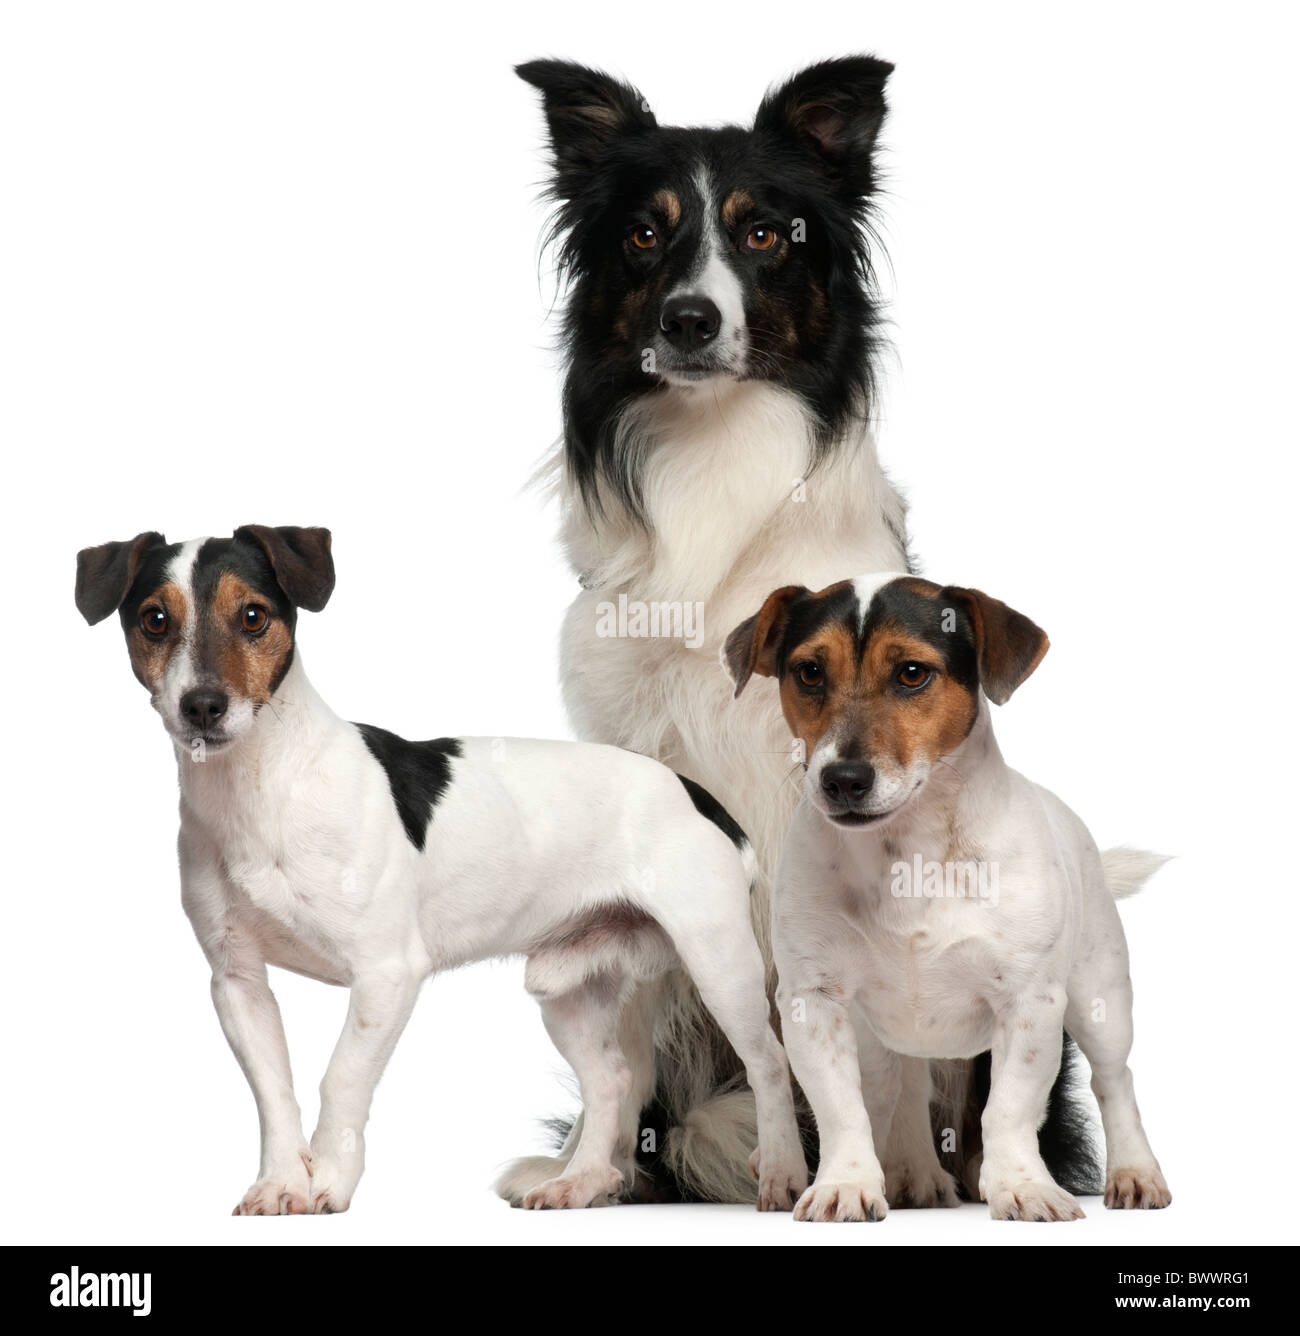 Border Collie and Jack Russells, 7 years, 5 years, 3 years old, in front of white background Stock Photo